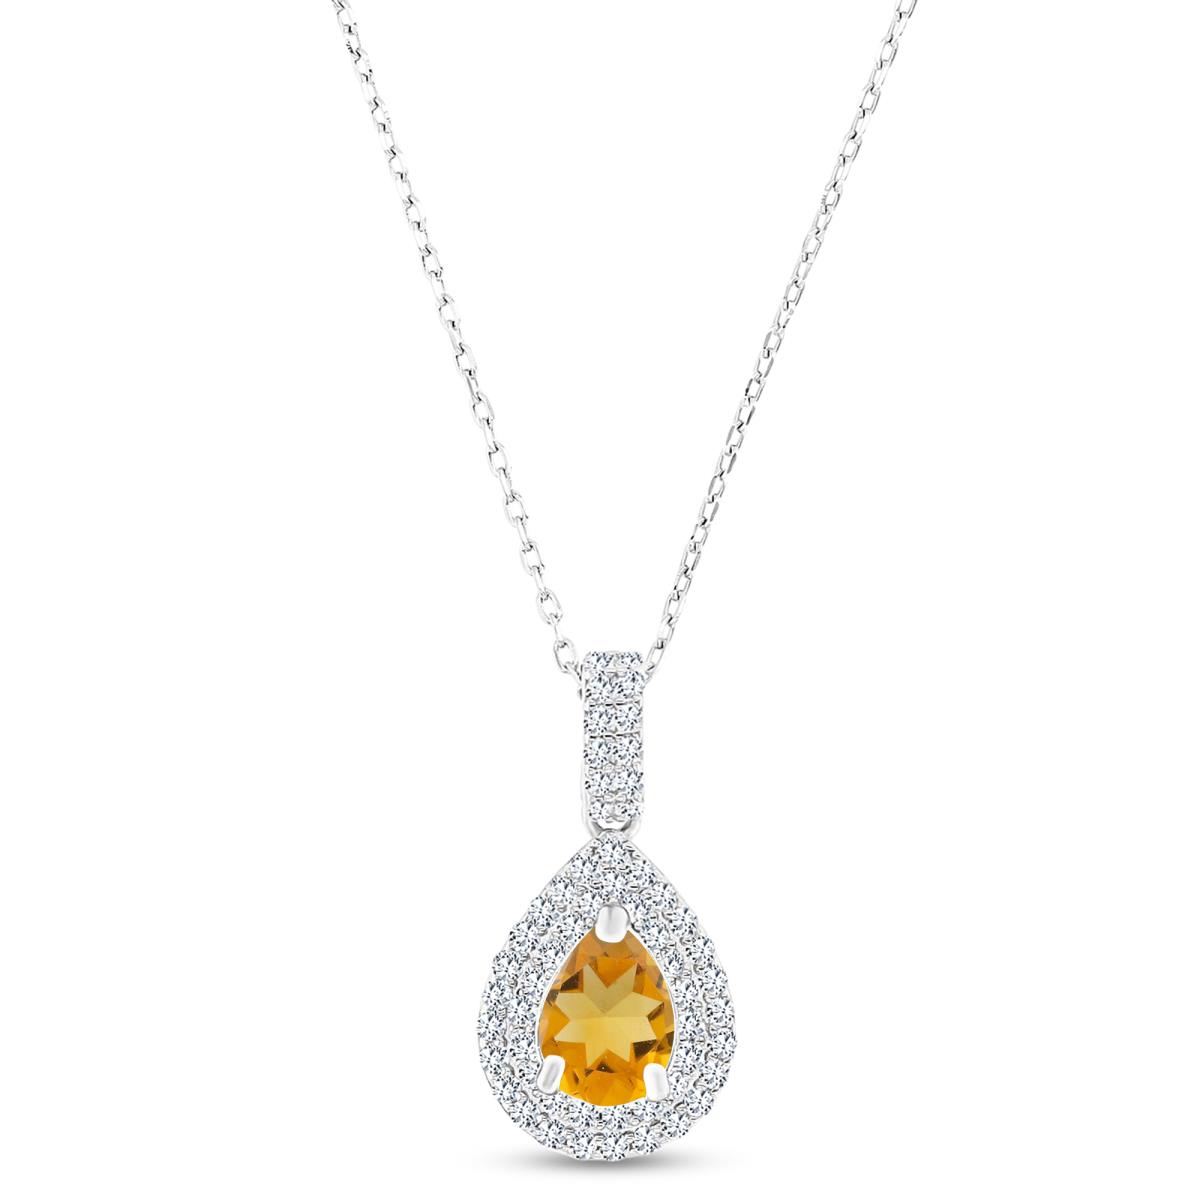 Sterling Silver Rhodium 8x6
mm PS Citrine/ Cr White Sapphire Double Halo 16"+2" Necklace